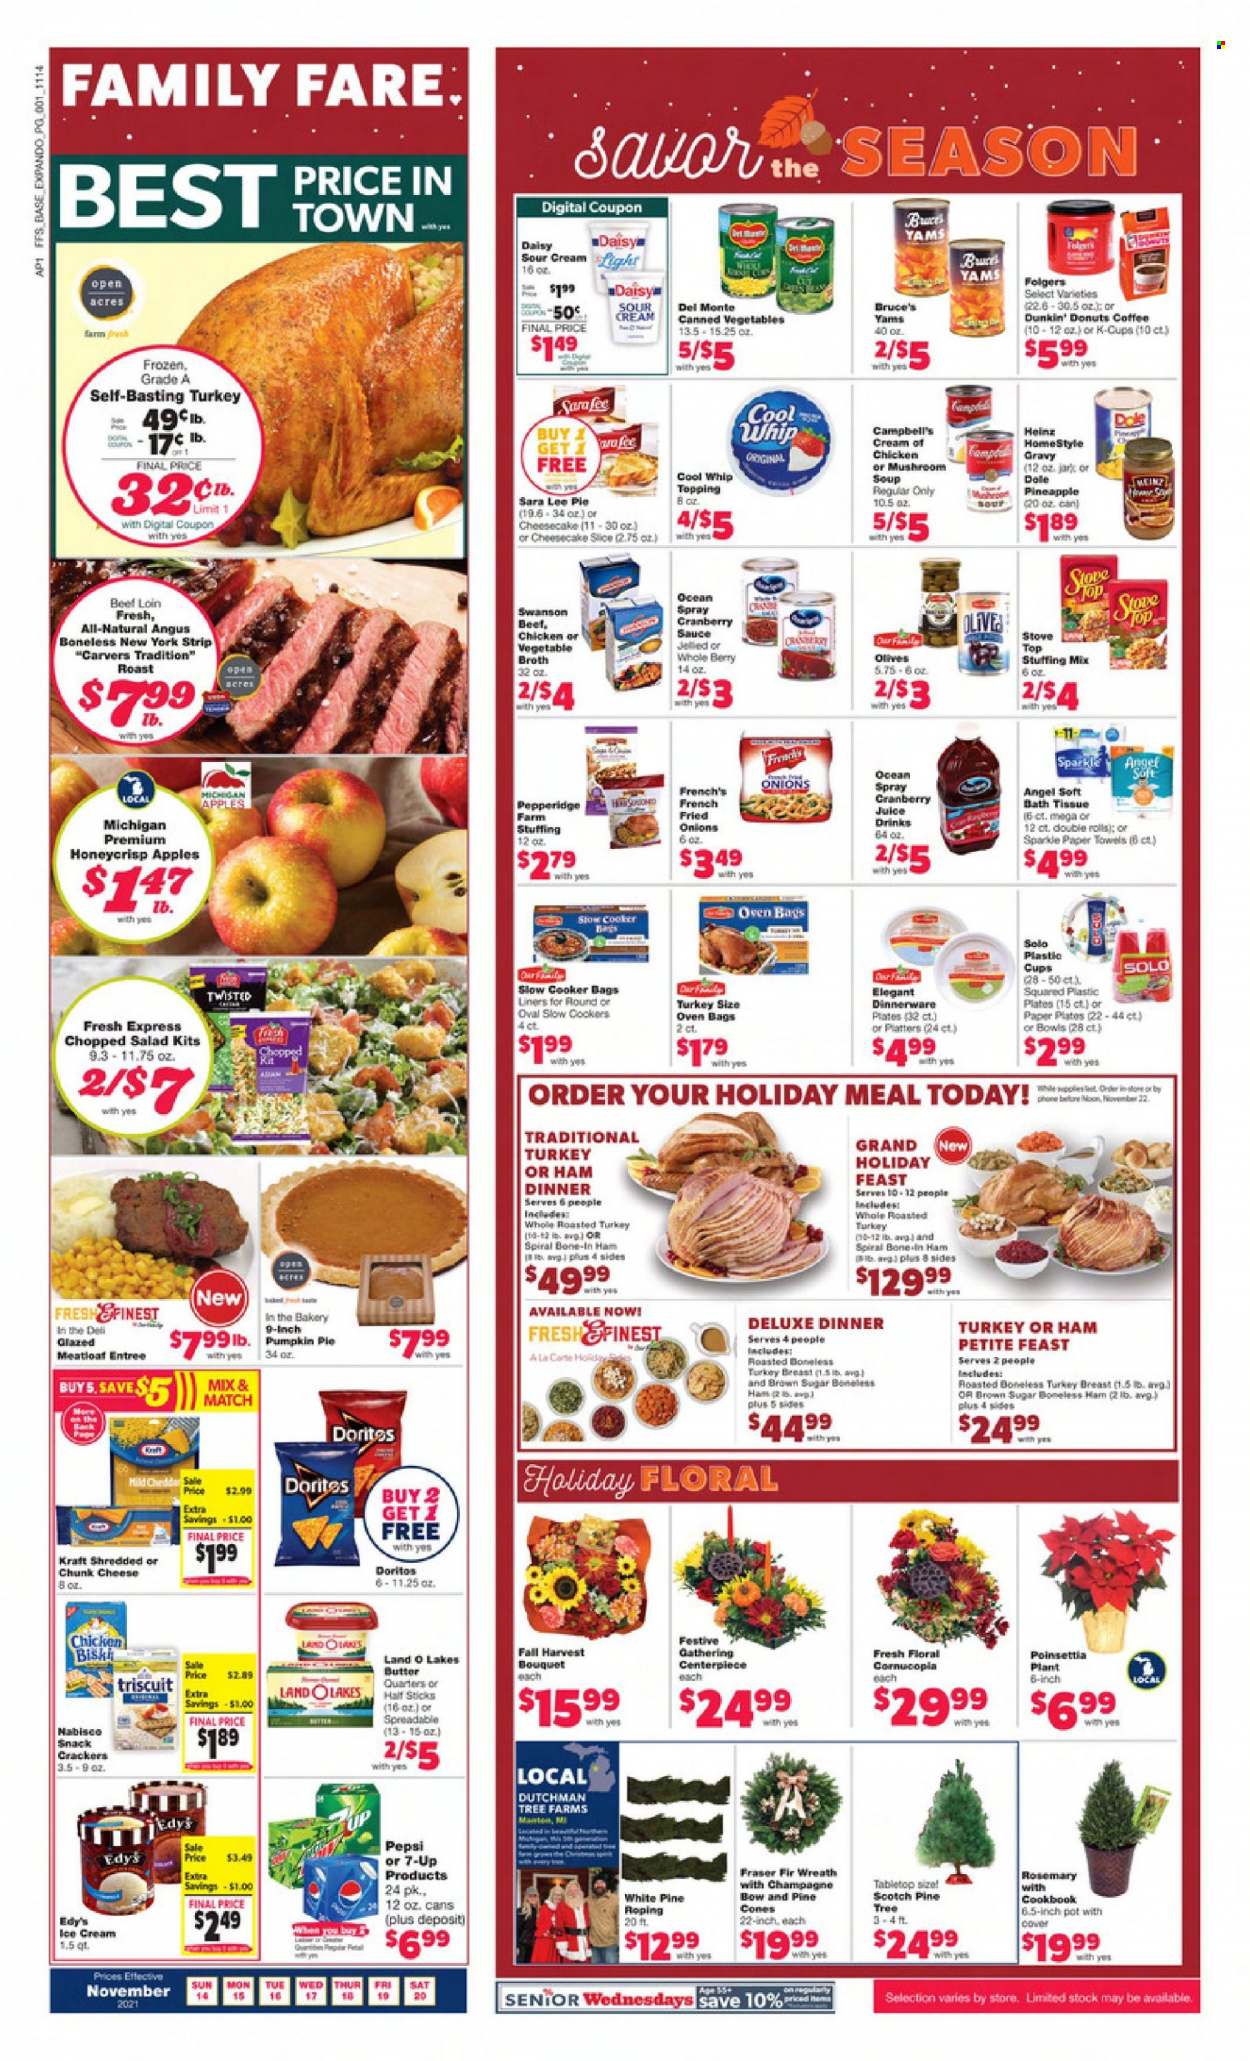 thumbnail - Family Fare Flyer - 11/14/2021 - 11/20/2021 - Sales products - Sara Lee, Dunkin' Donuts, Dole, chopped salad, apples, pineapple, Campbell's, mushroom soup, soup, sauce, Kraft®, chunk cheese, butter, Cool Whip, sour cream, ice cream, snack, crackers, Doritos, stuffing mix, topping, broth, Heinz, olives, canned vegetables, rosemary, cranberry sauce, Pepsi, juice, 7UP, coffee, Folgers, champagne, turkey breast, bath tissue, kitchen towels, paper towels, dinnerware set, plate, pot, cup, paper plate, plastic plate, cookbook, pine tree, poinsettia, bouquet. Page 1.